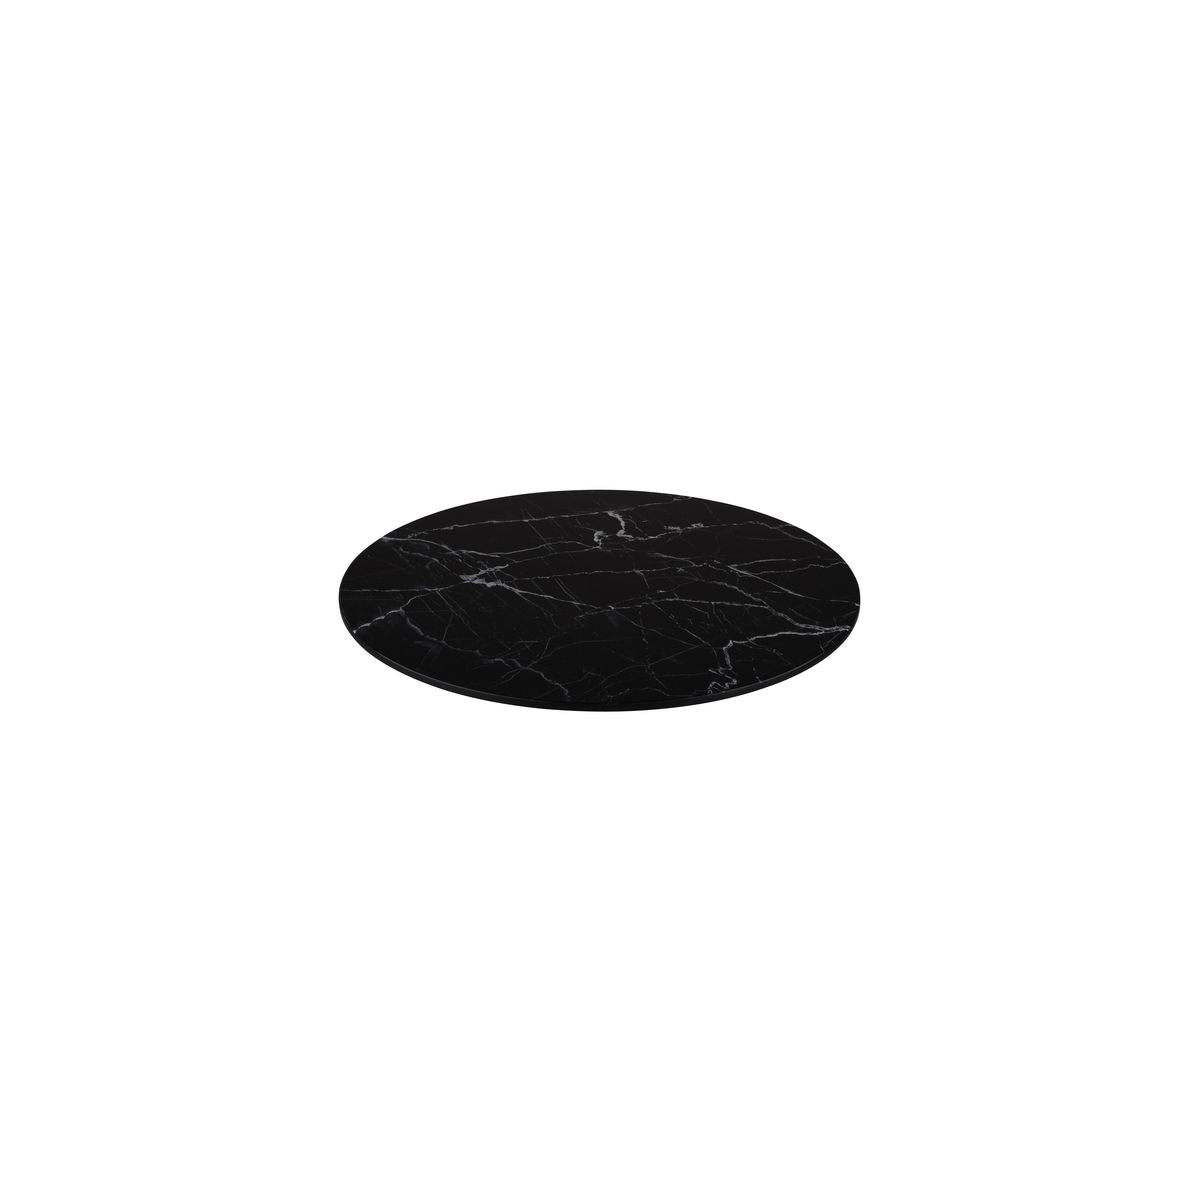 Flat Round Platter, 330mm, Melamine - Black Marble from Ryner Melamine. Sold in boxes of 3. Hospitality quality at wholesale price with The Flying Fork! 